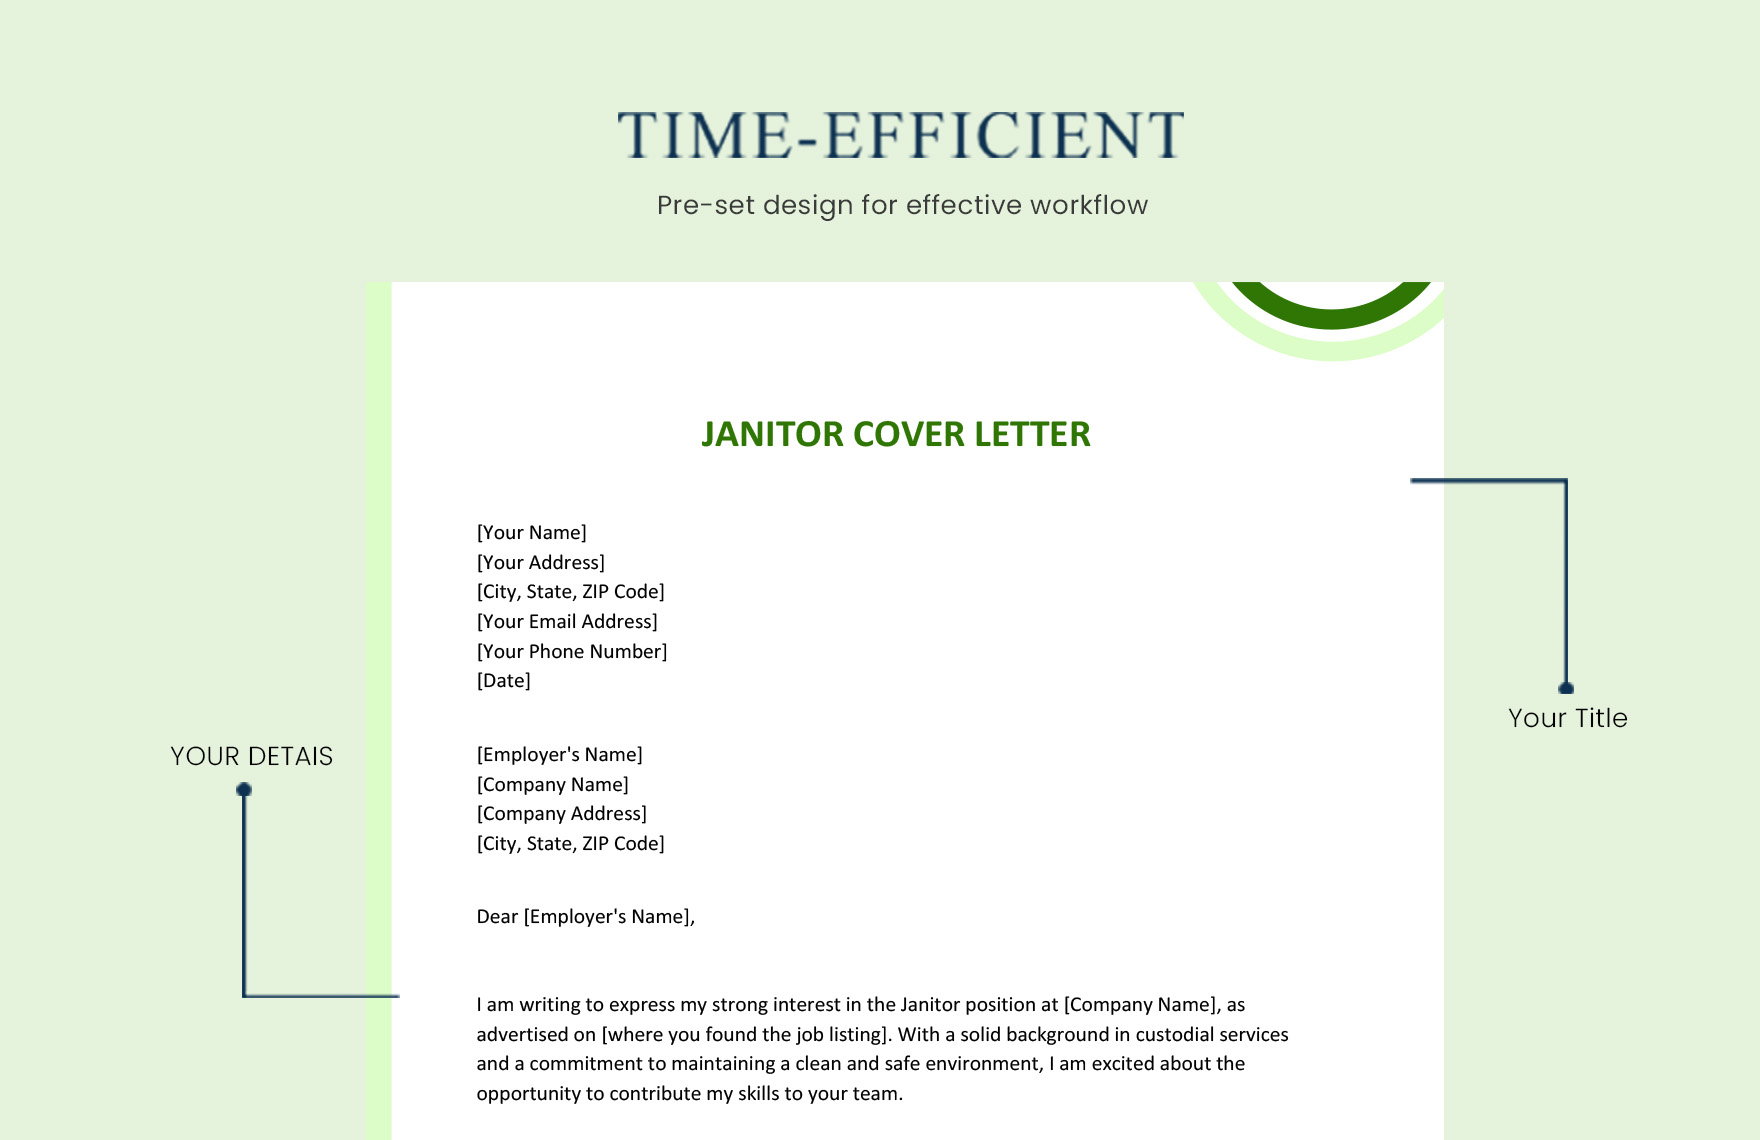 Janitor Cover Letter